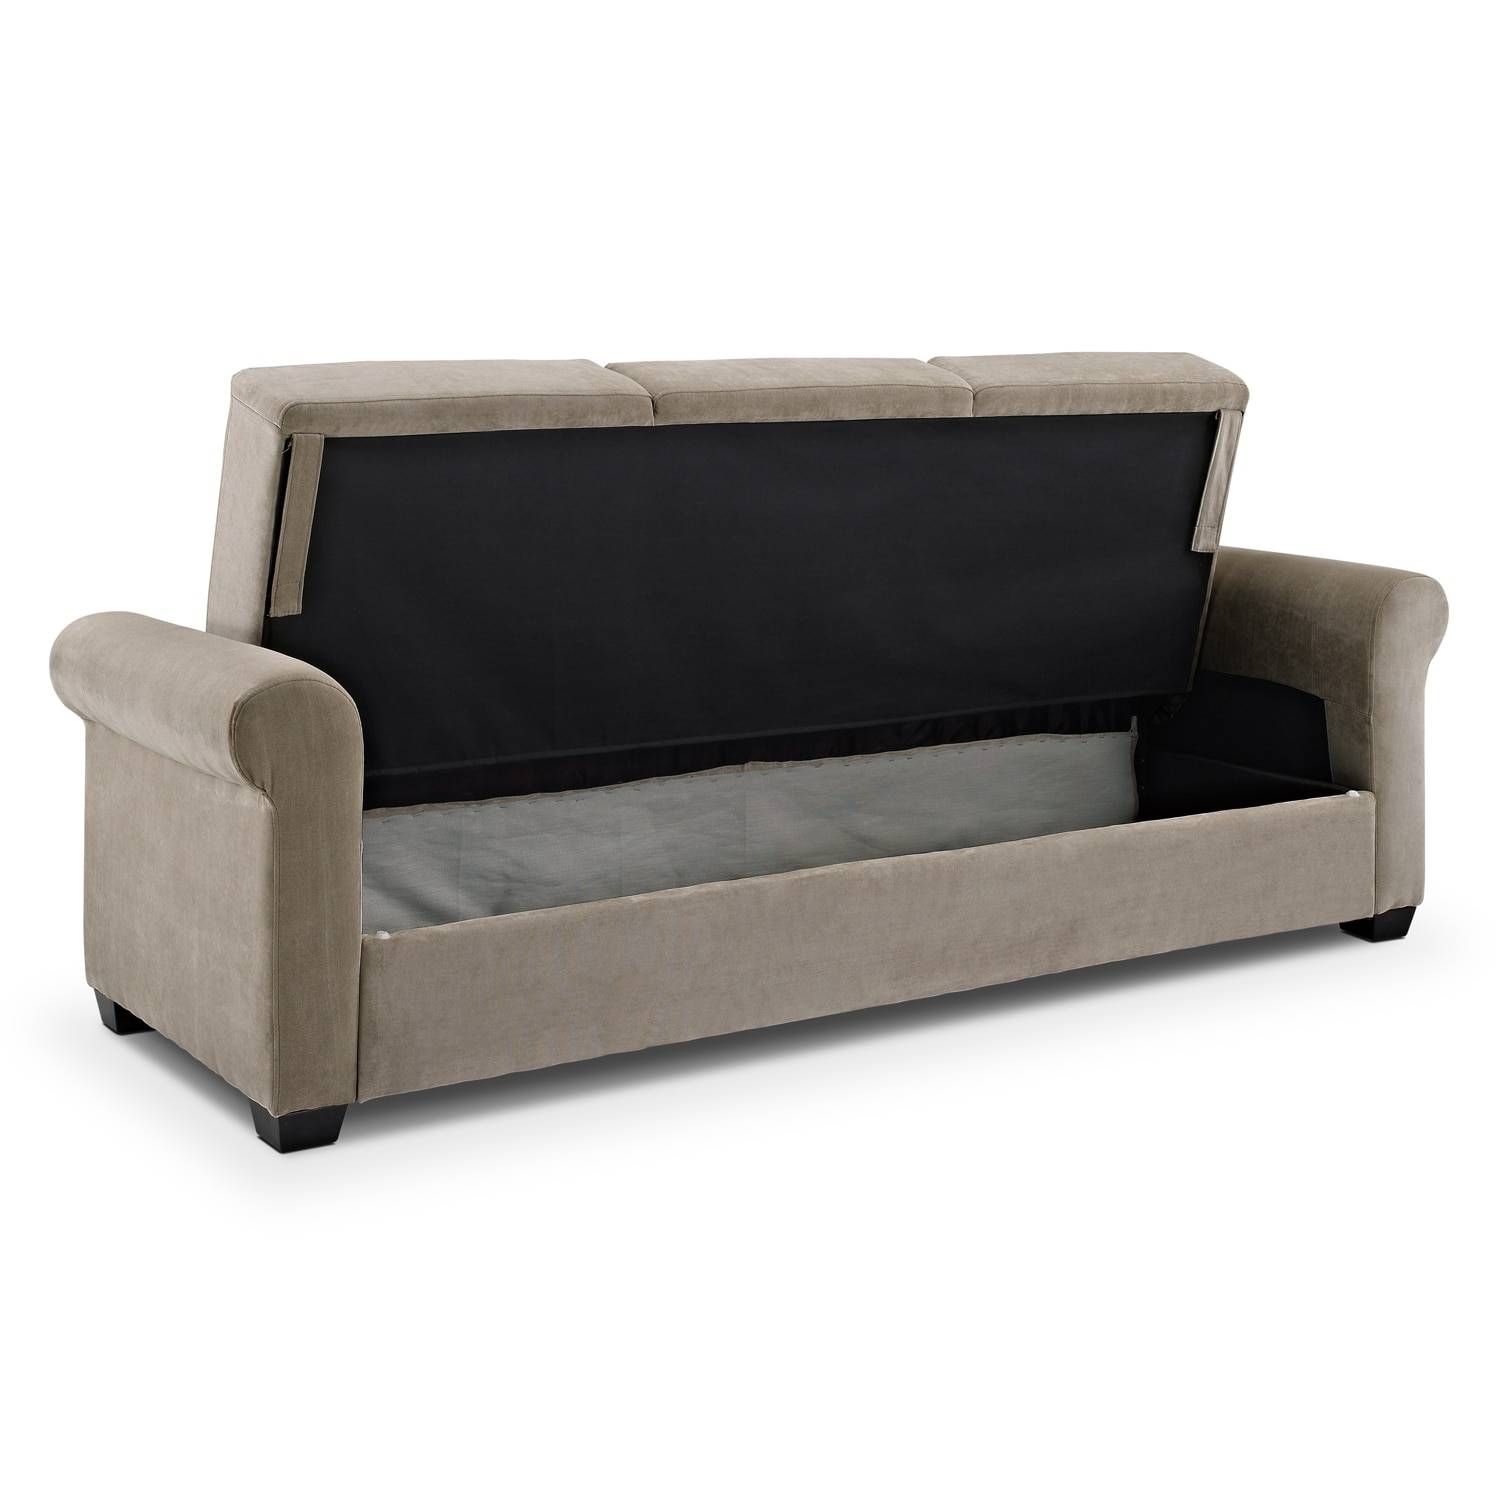 Thomas Futon Sofa Bed With Storage – Light Brown | Value City Within Storage Sofa Beds (Photo 19 of 30)